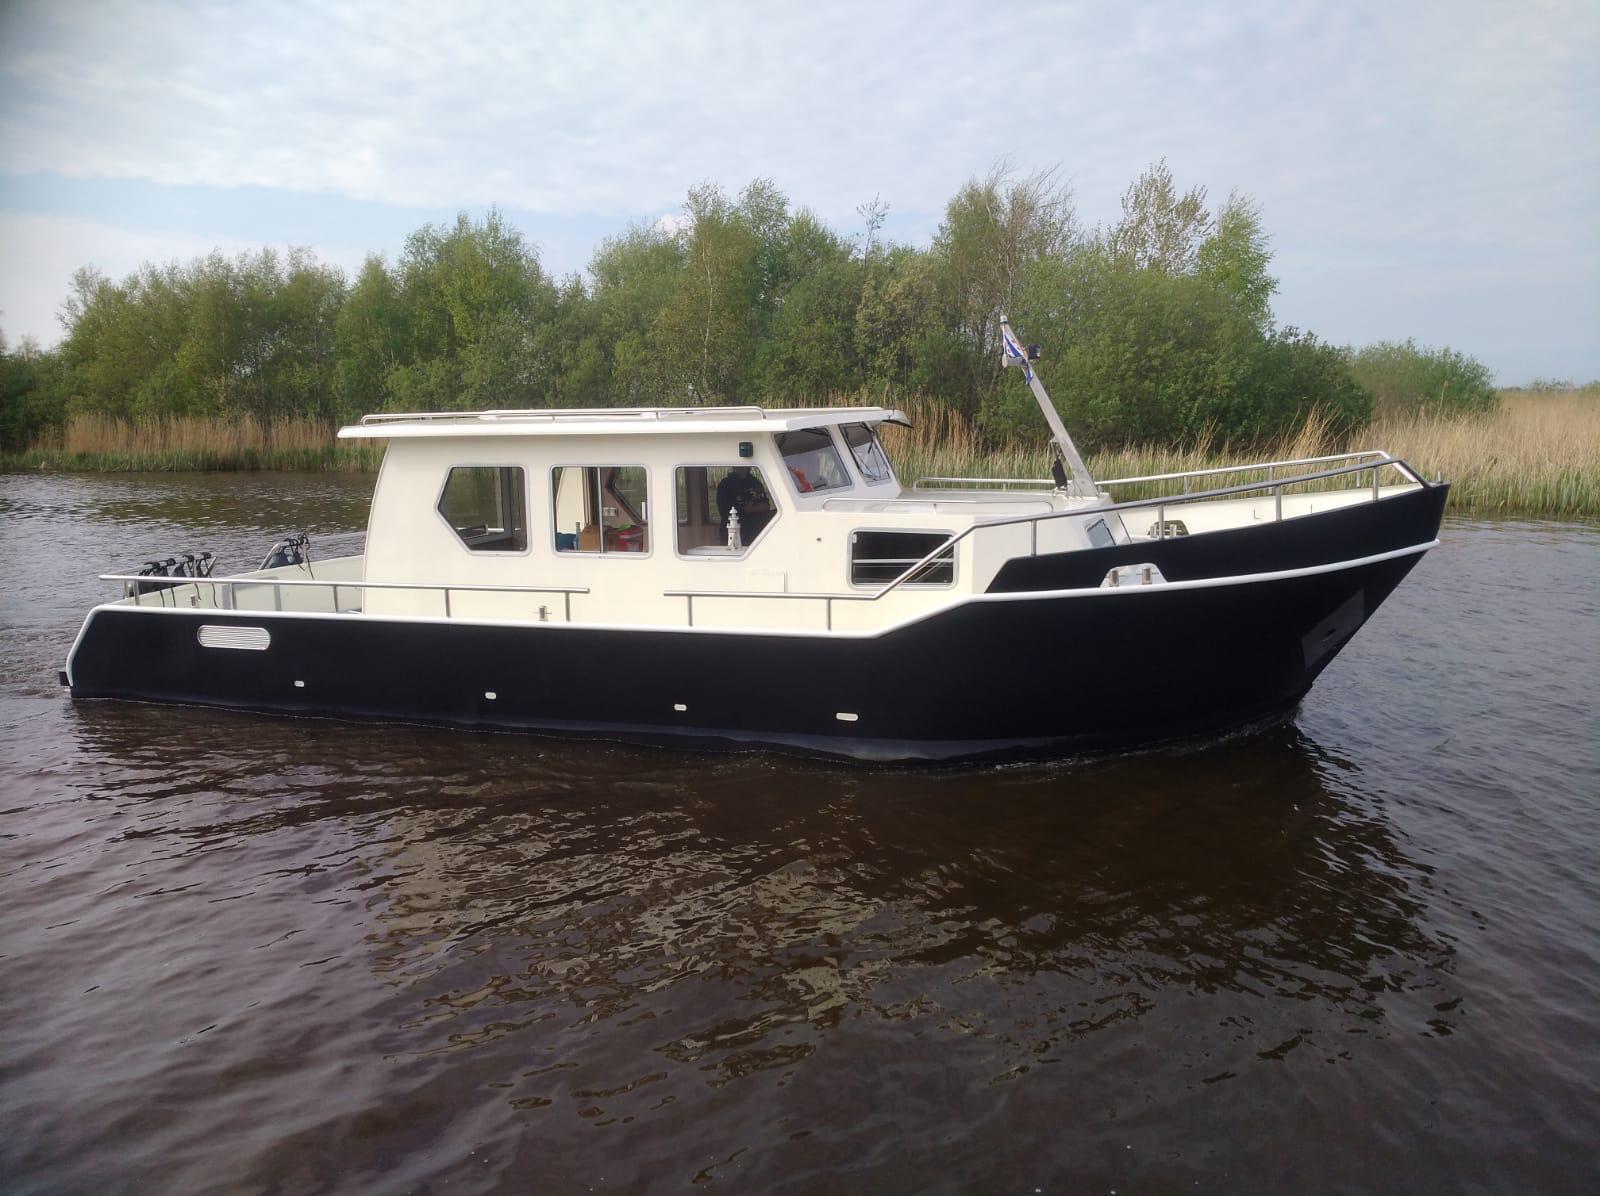 Used 7.7m Aluminium Fishing Boat for Sale, Boats For Sale